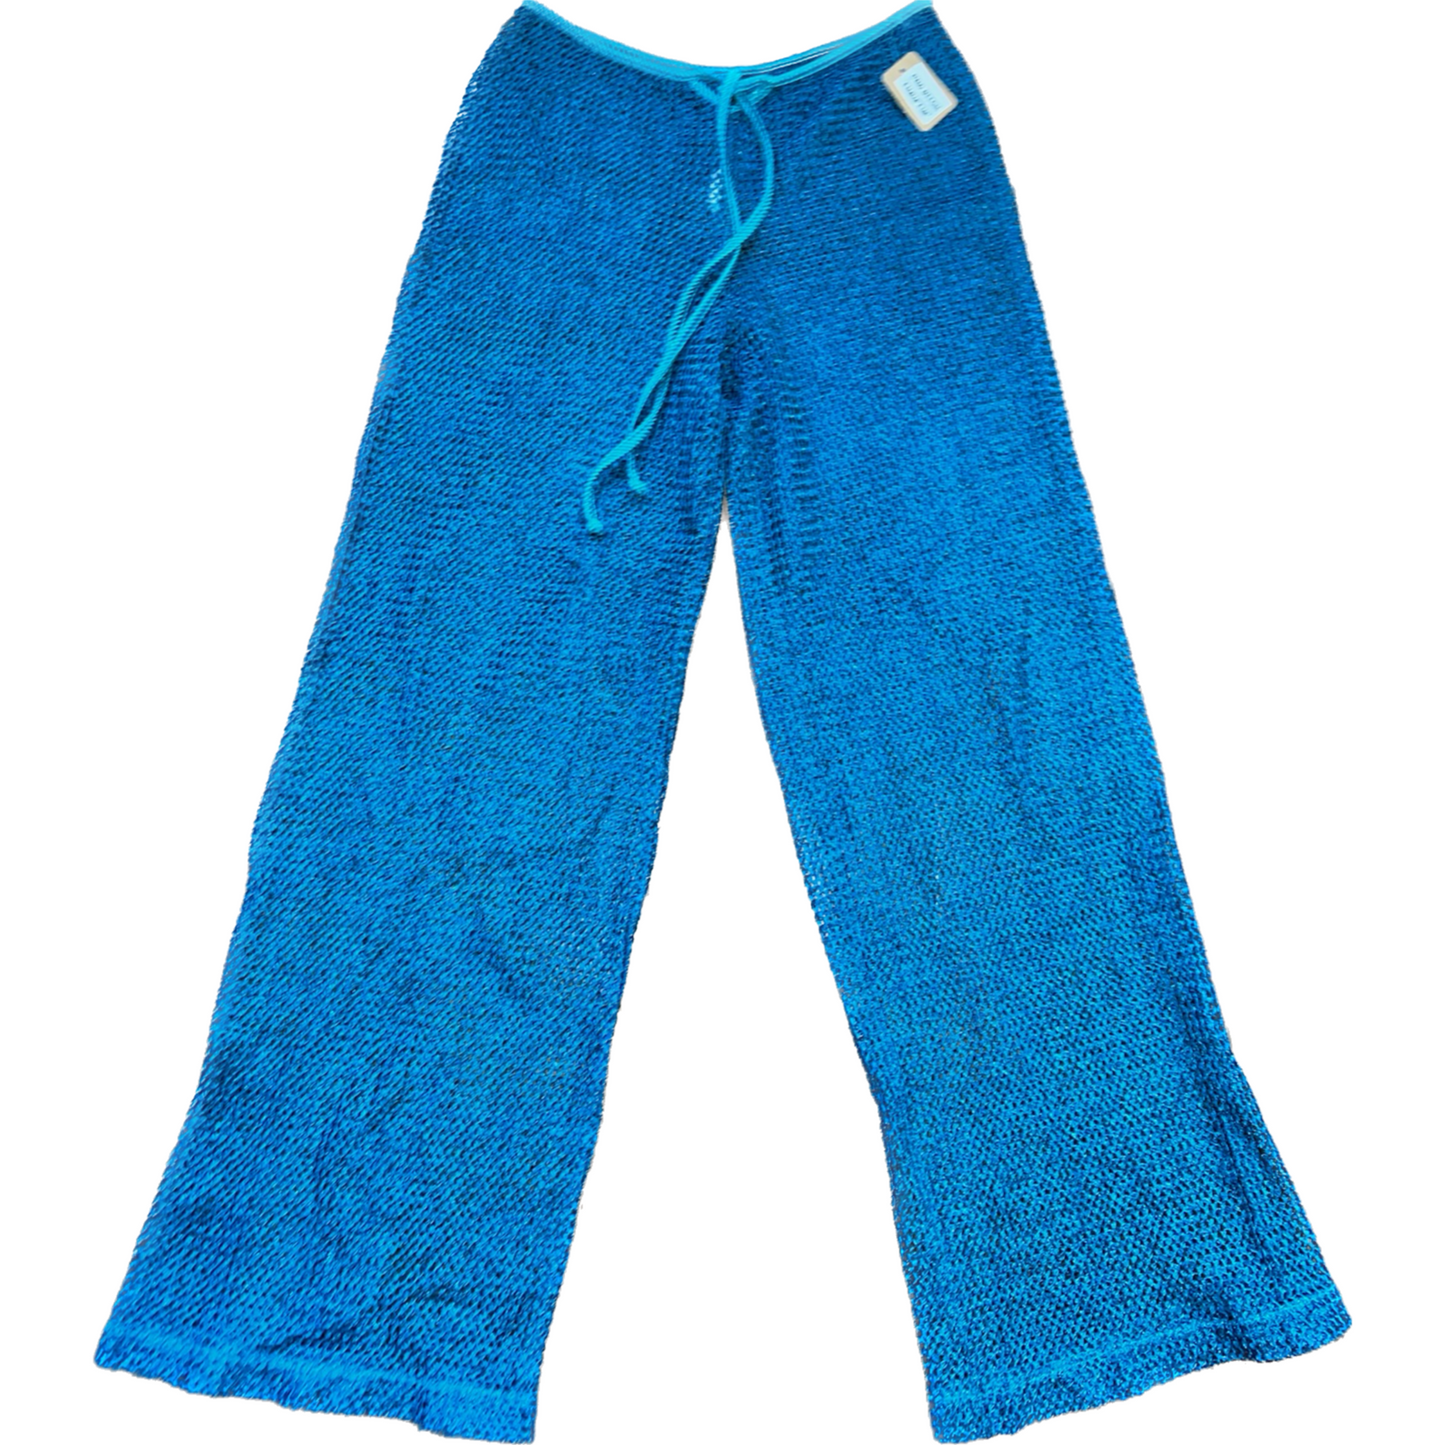 Blue Netted Pants (S/M)